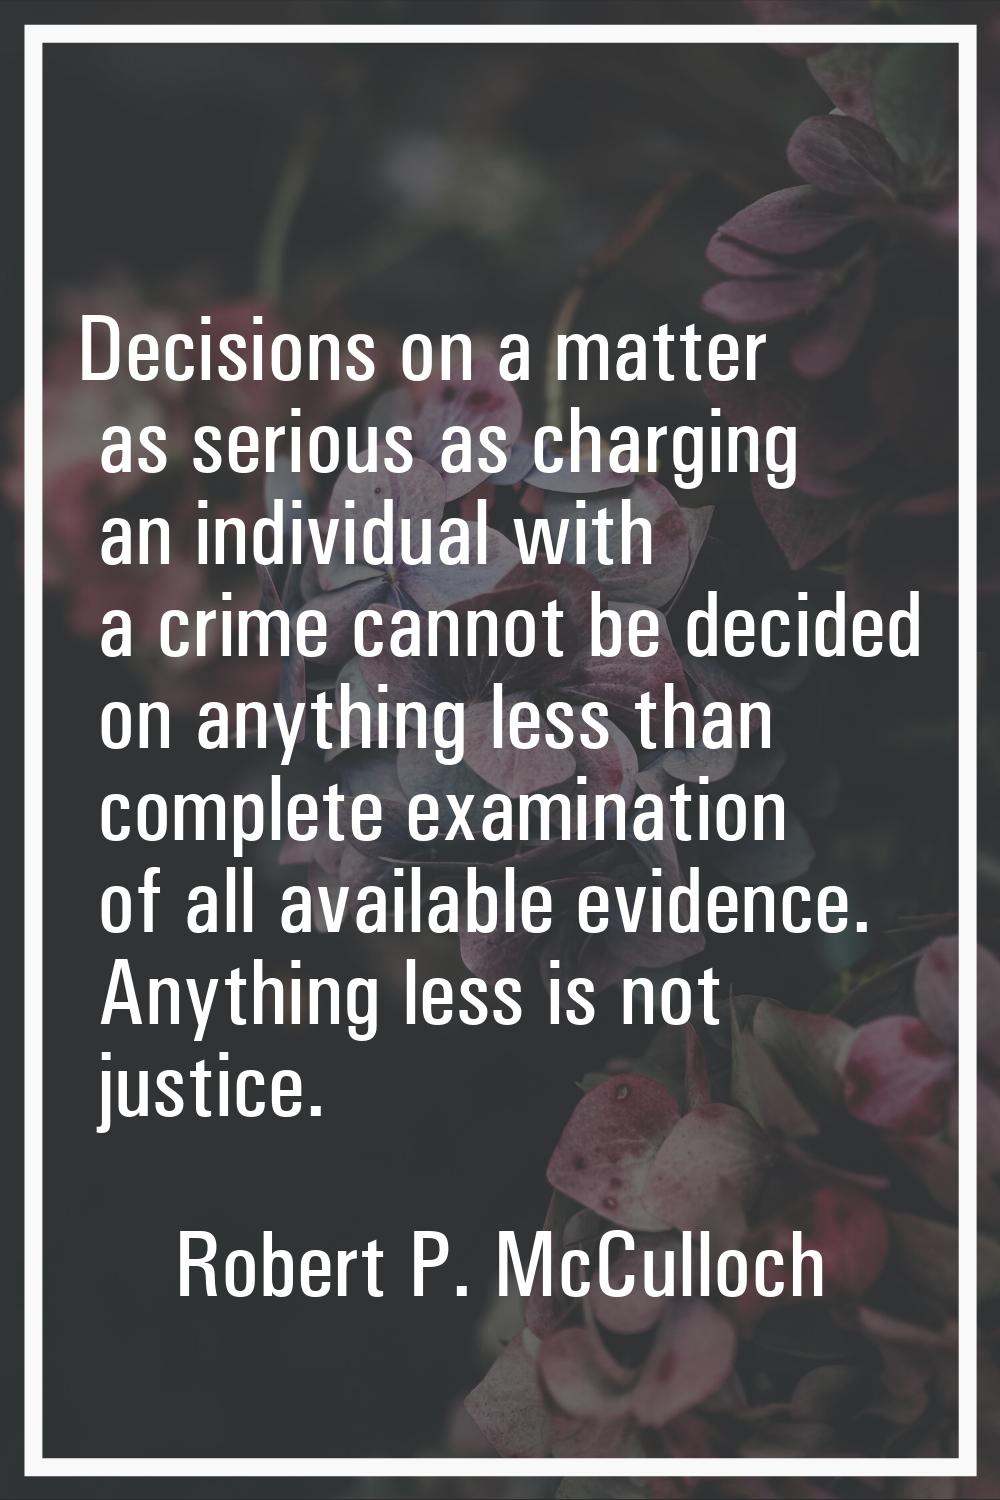 Decisions on a matter as serious as charging an individual with a crime cannot be decided on anythi